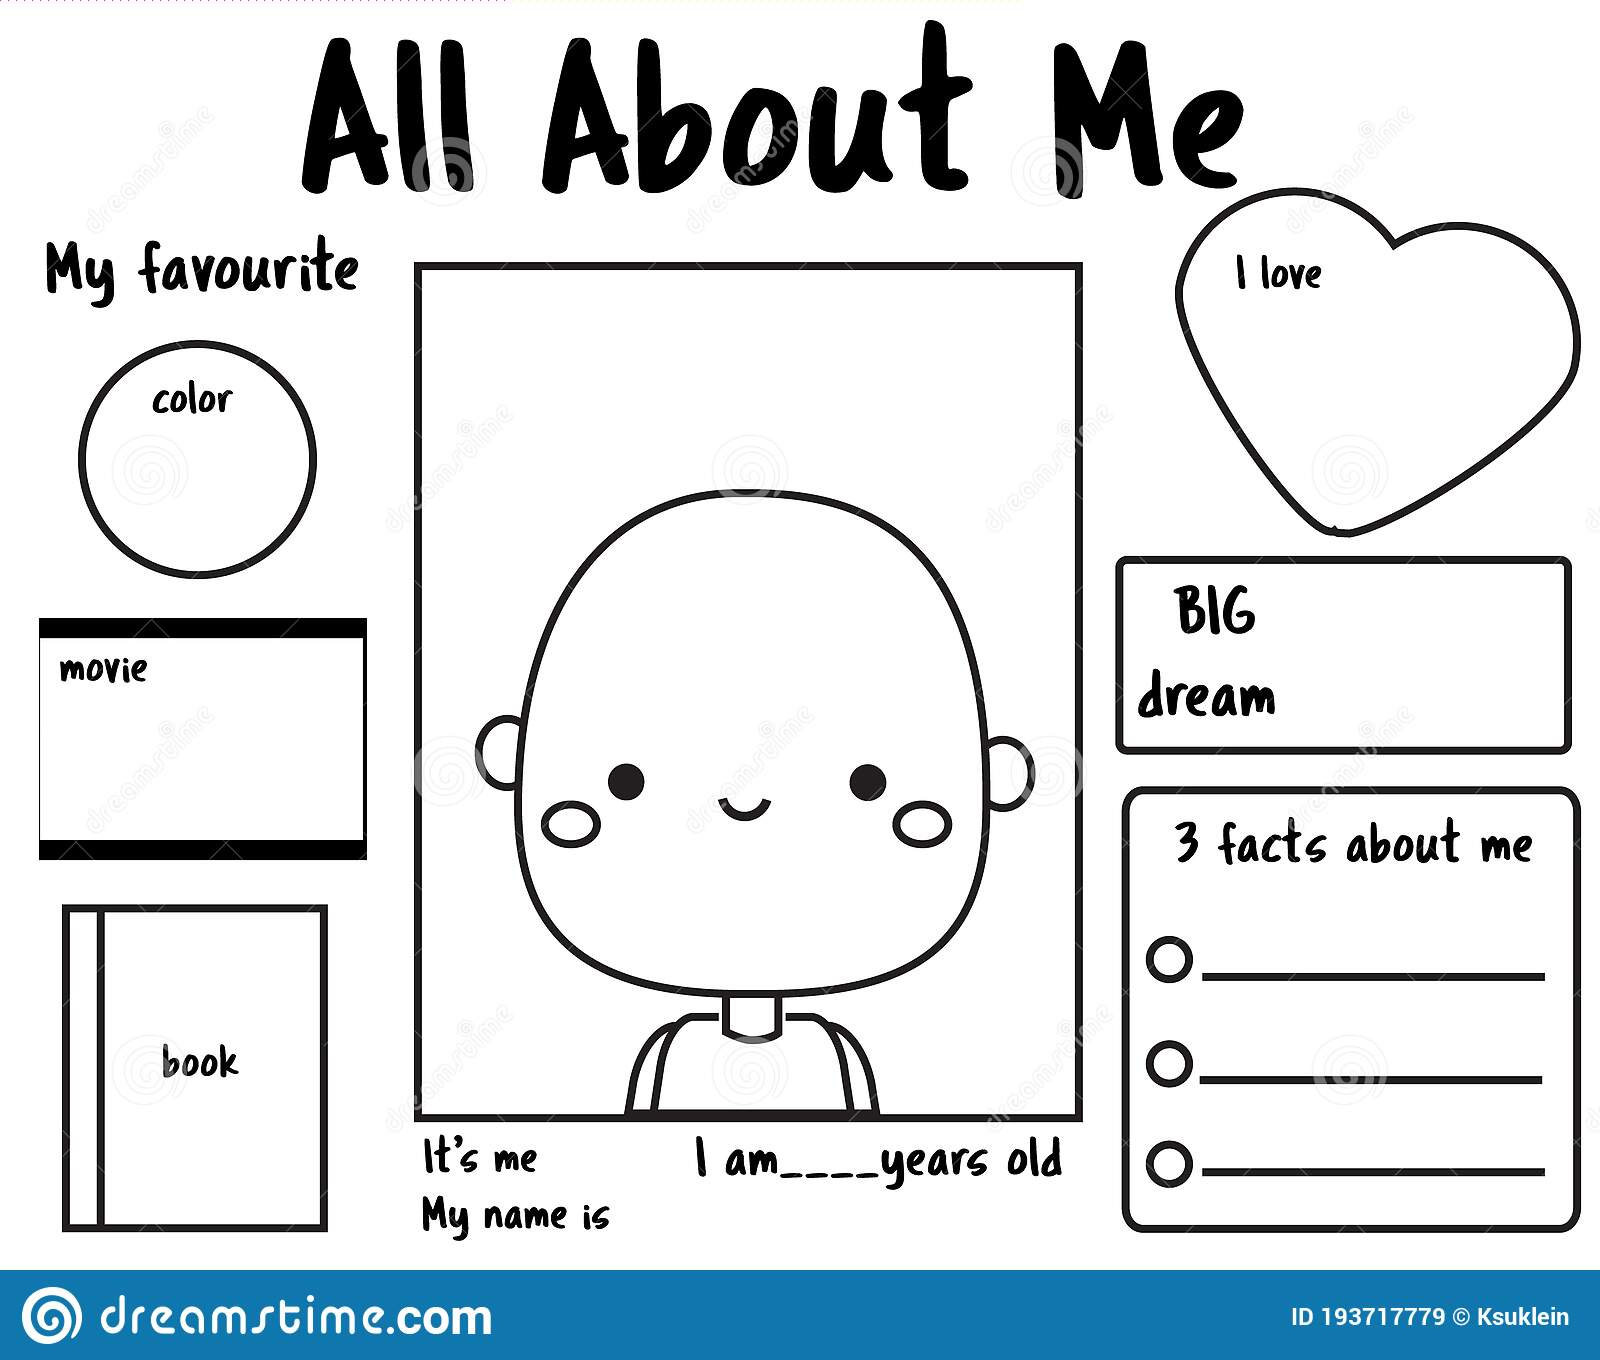 All About Me Printable Back To School Writing Prompt For Kids Blank 